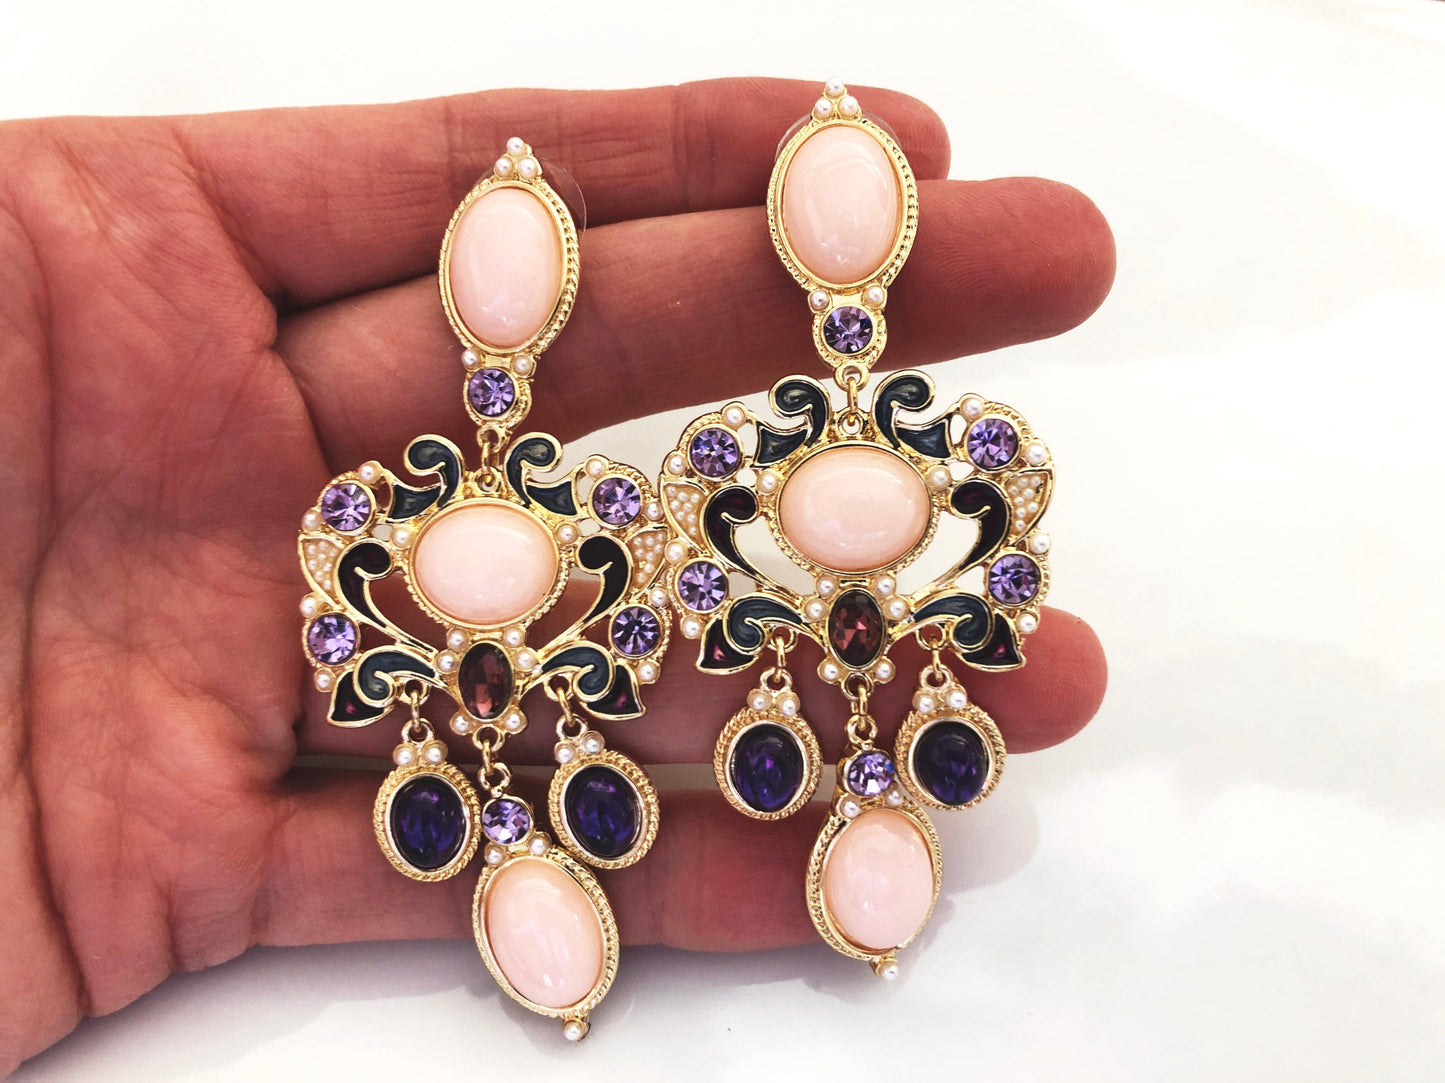 A vintage inspired glamour. Tones of pink, purple and gold with miniature pearl beading.